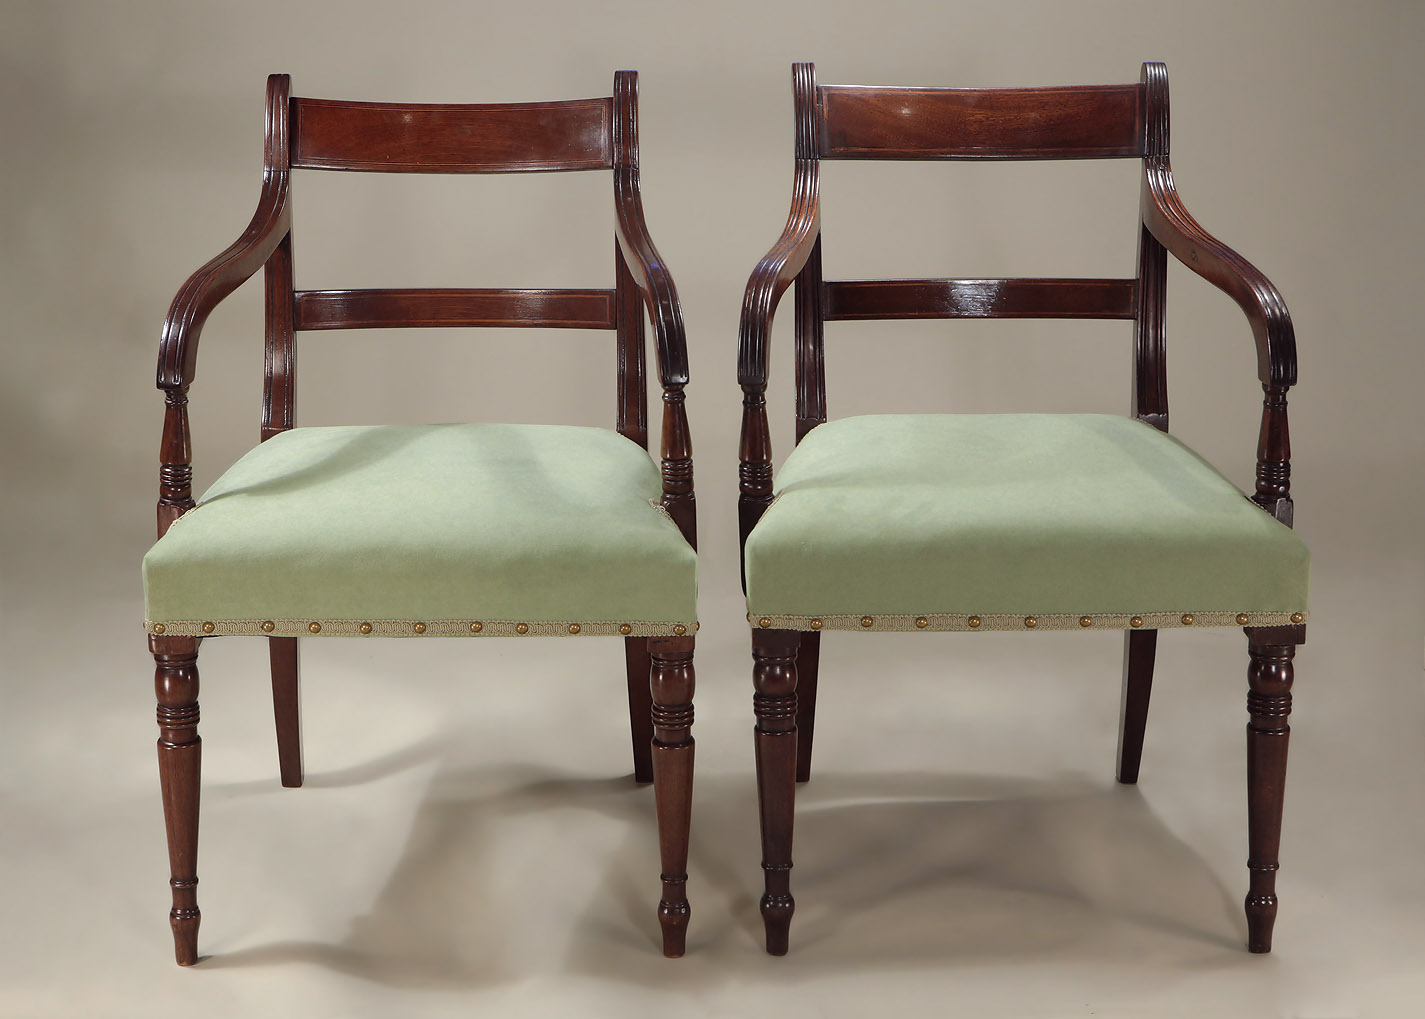 Set of 6 Late Georgian Inlaid Mahogany Sidechairs, showing the slight variance between the two armchairs